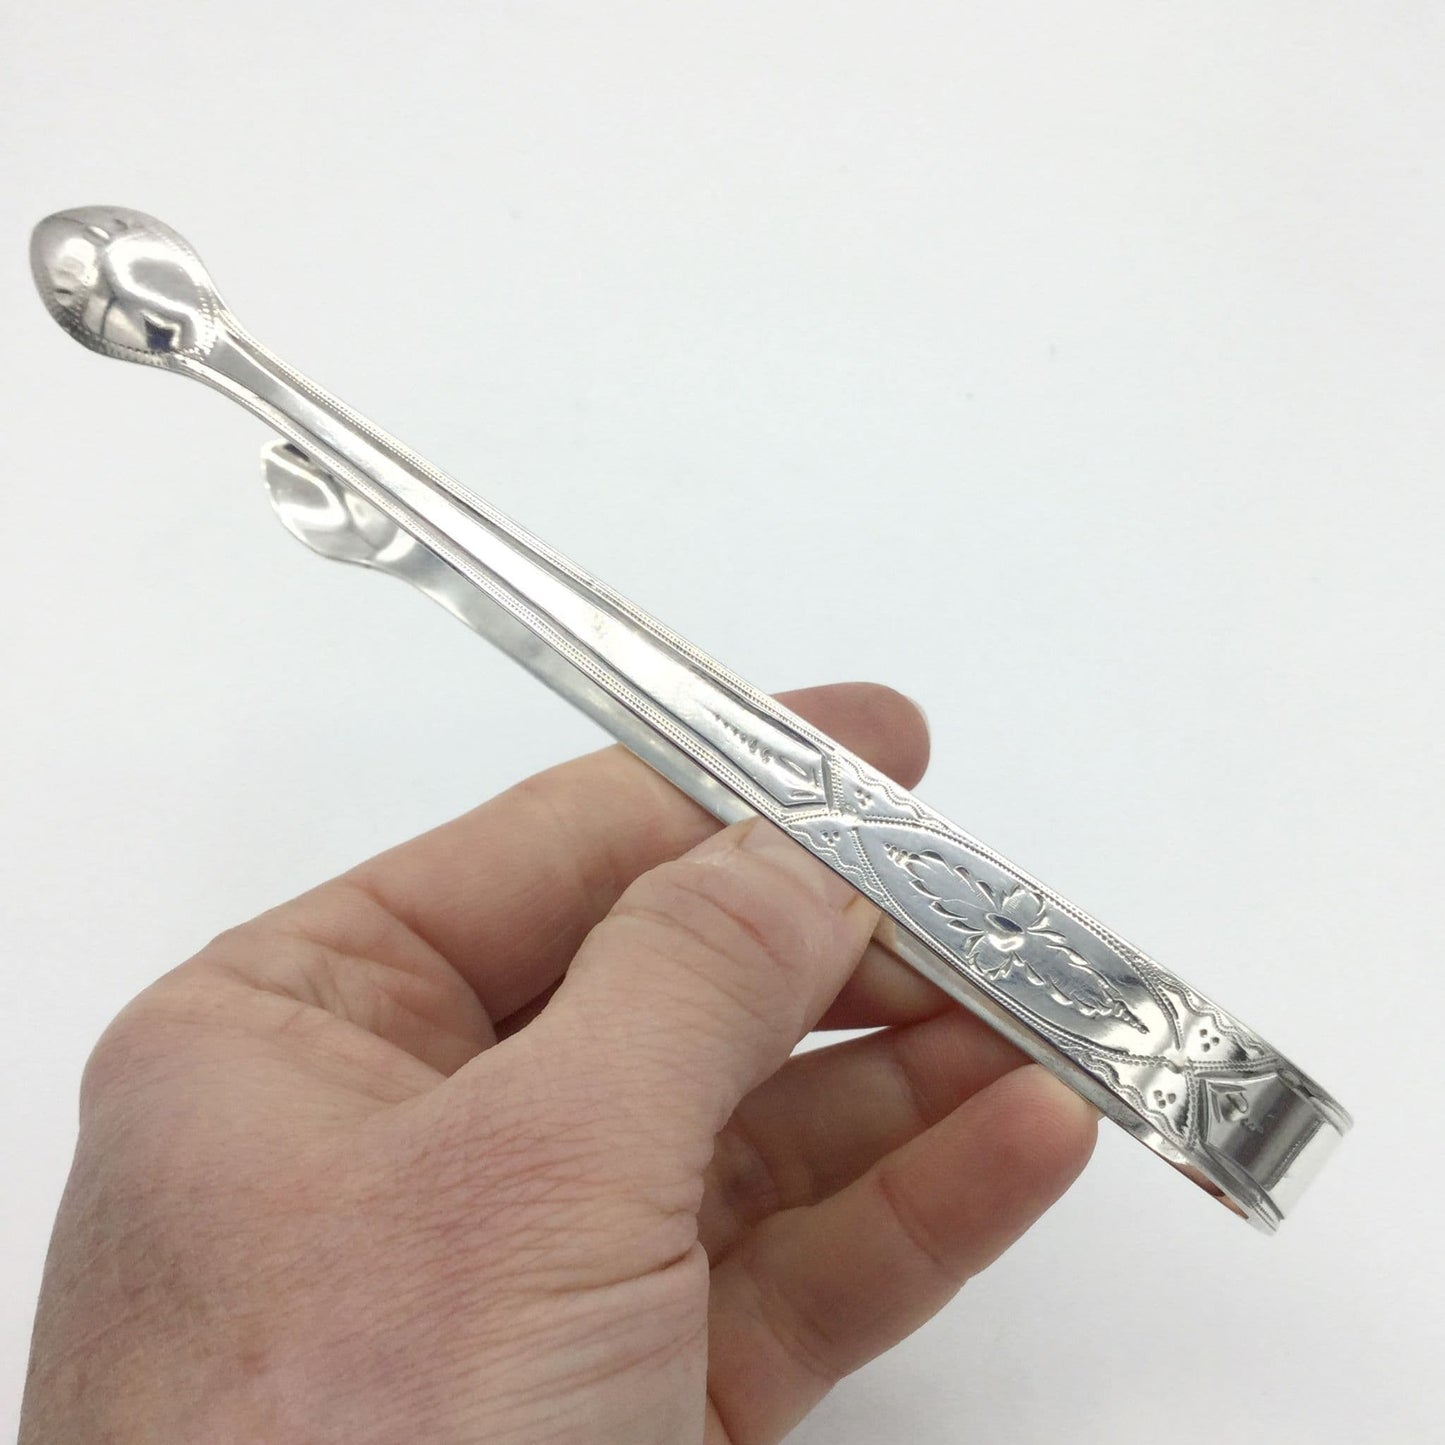 1700s Silver sugar tongs with a pretty floral engraved design on a white background held in hand